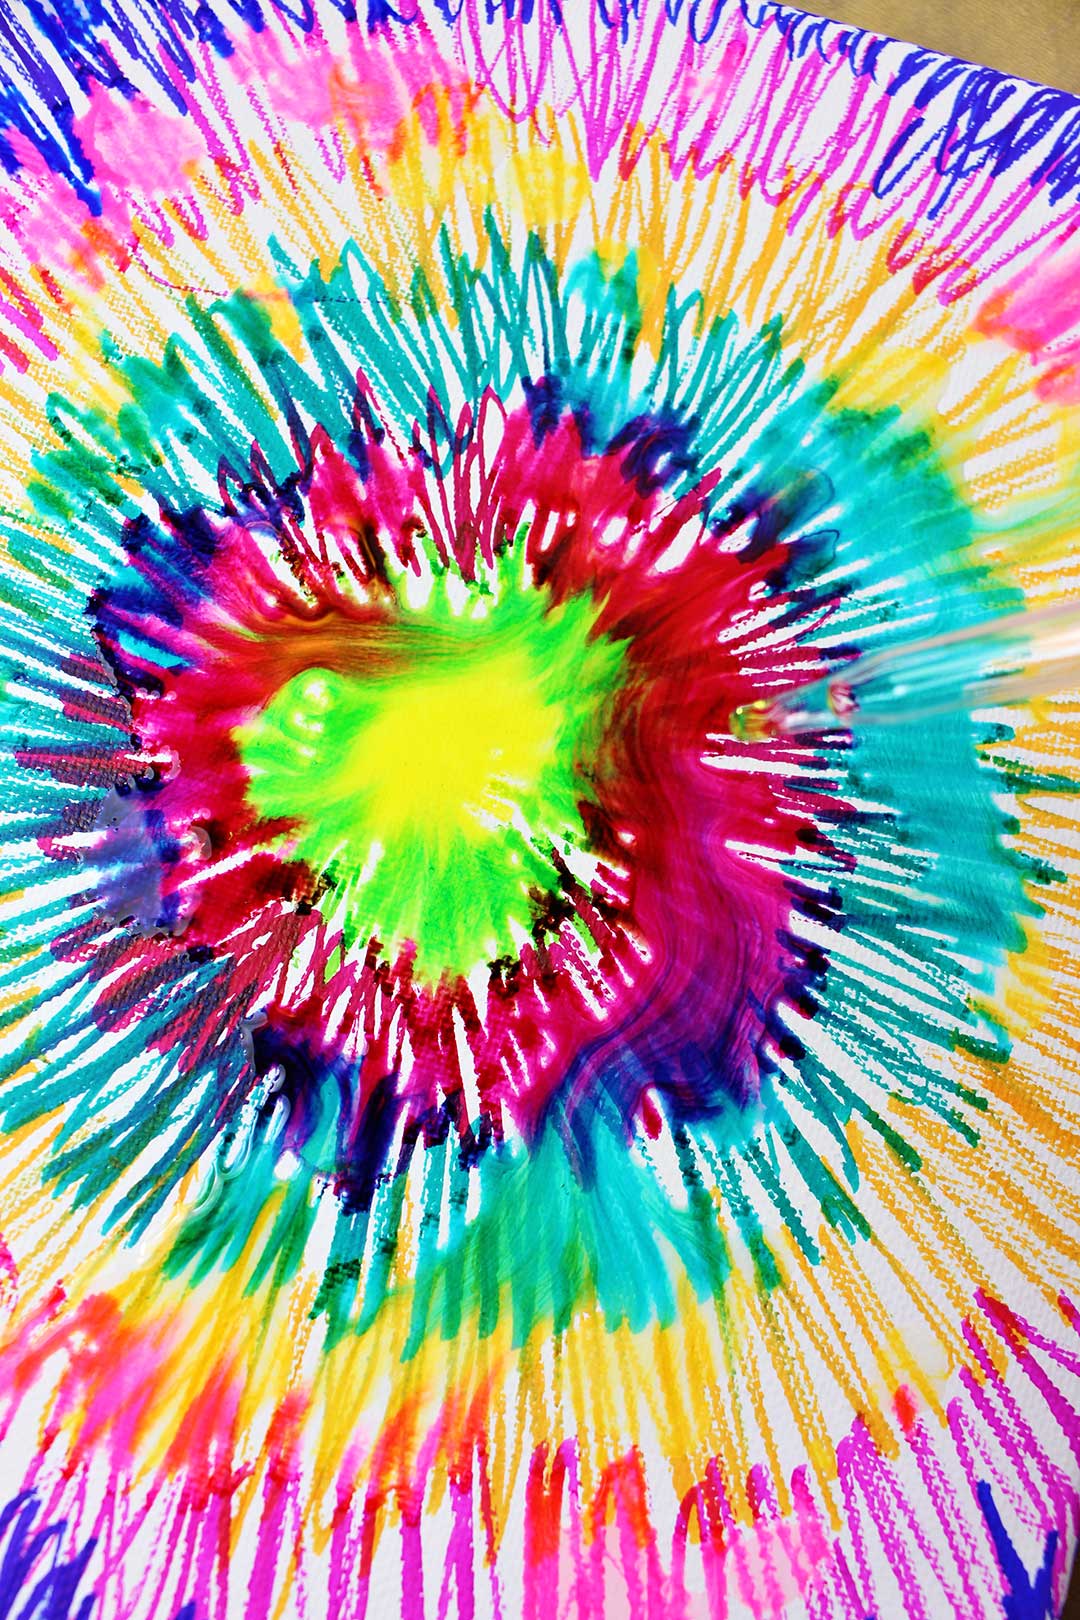 A canvas colored with sharpies in a tie dye pattern, beginning to swirl from drops of alcohol..